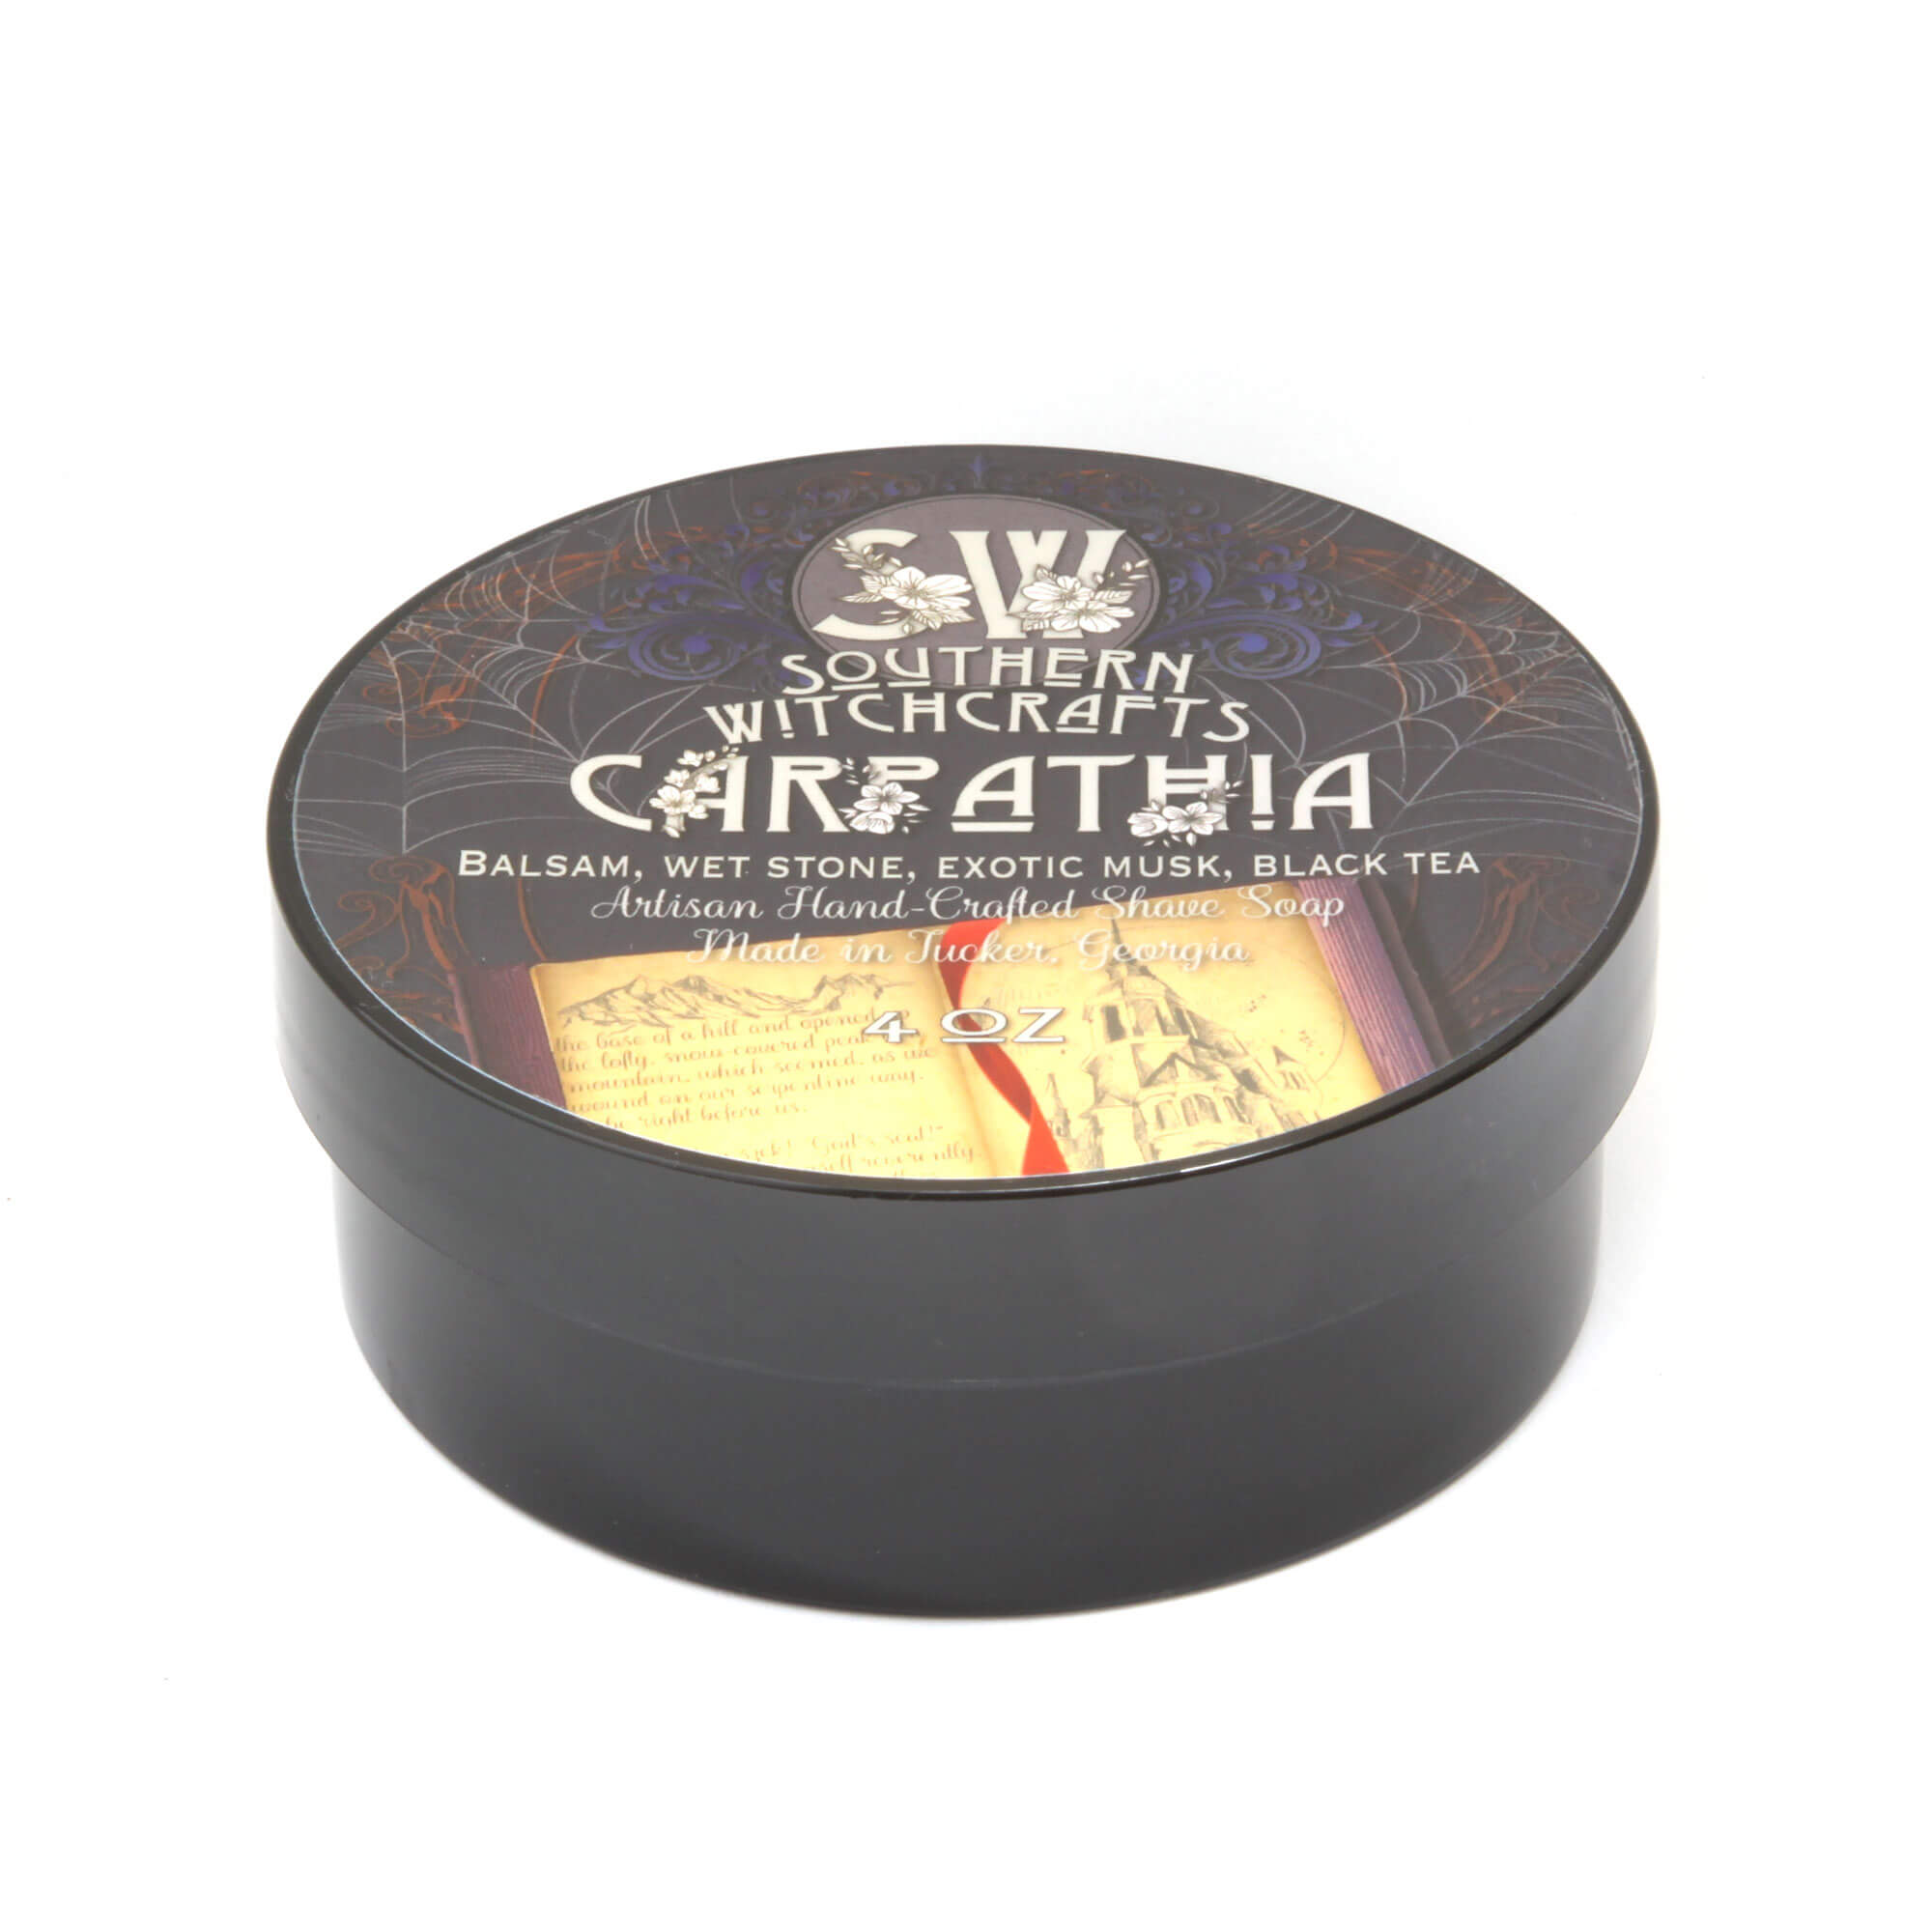 Southern Witchcrafts Carpathia Shaving Soap